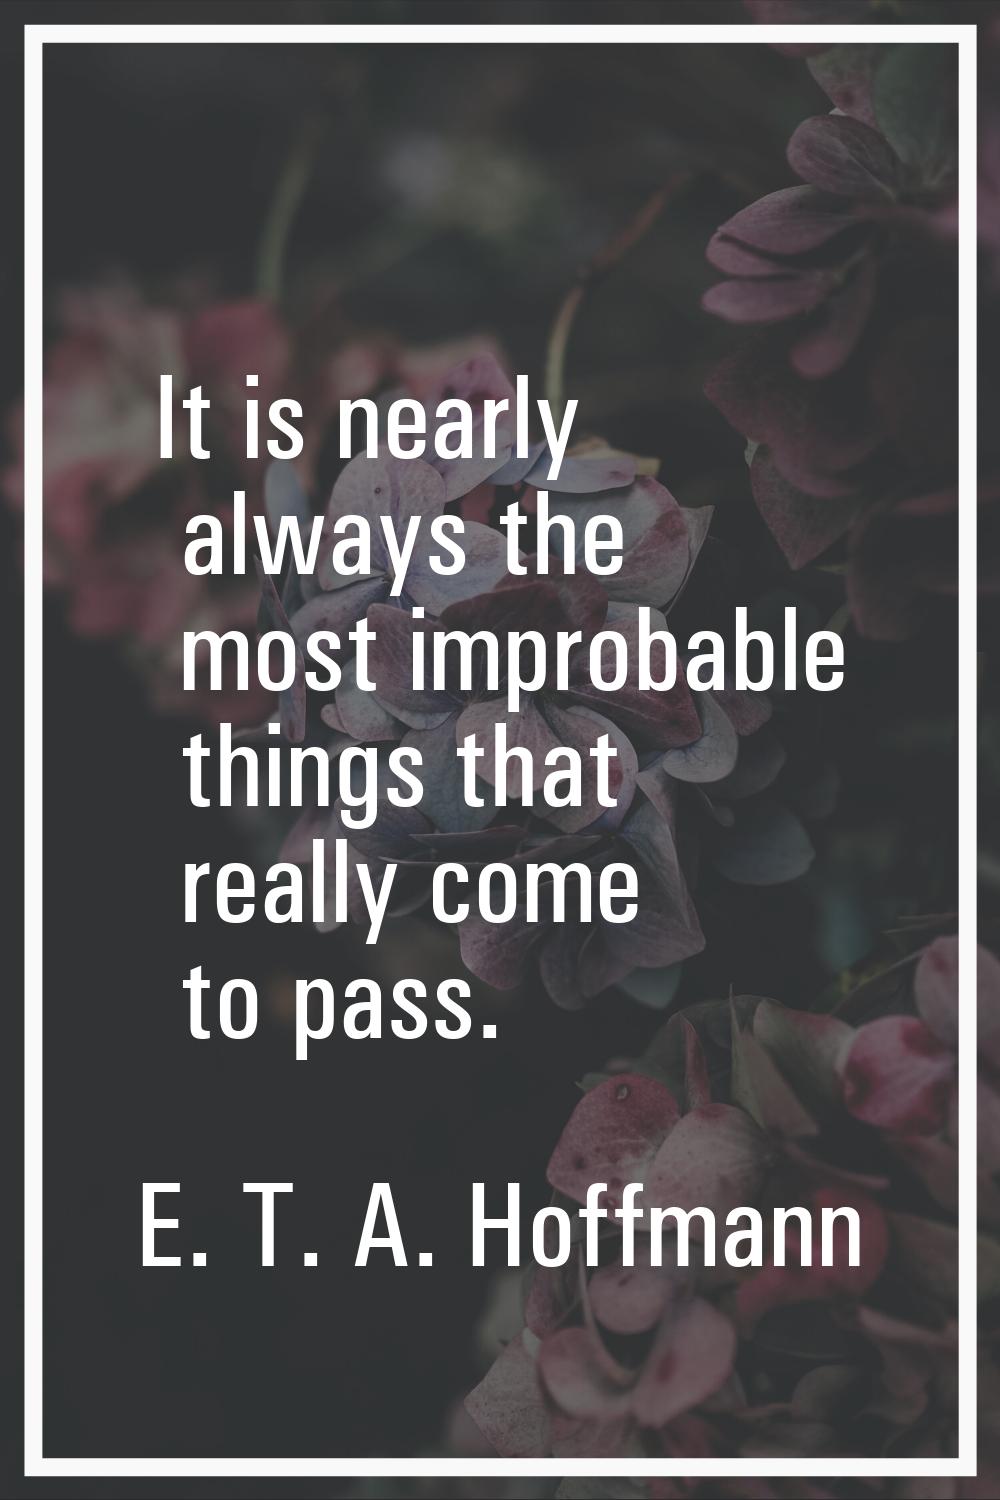 It is nearly always the most improbable things that really come to pass.